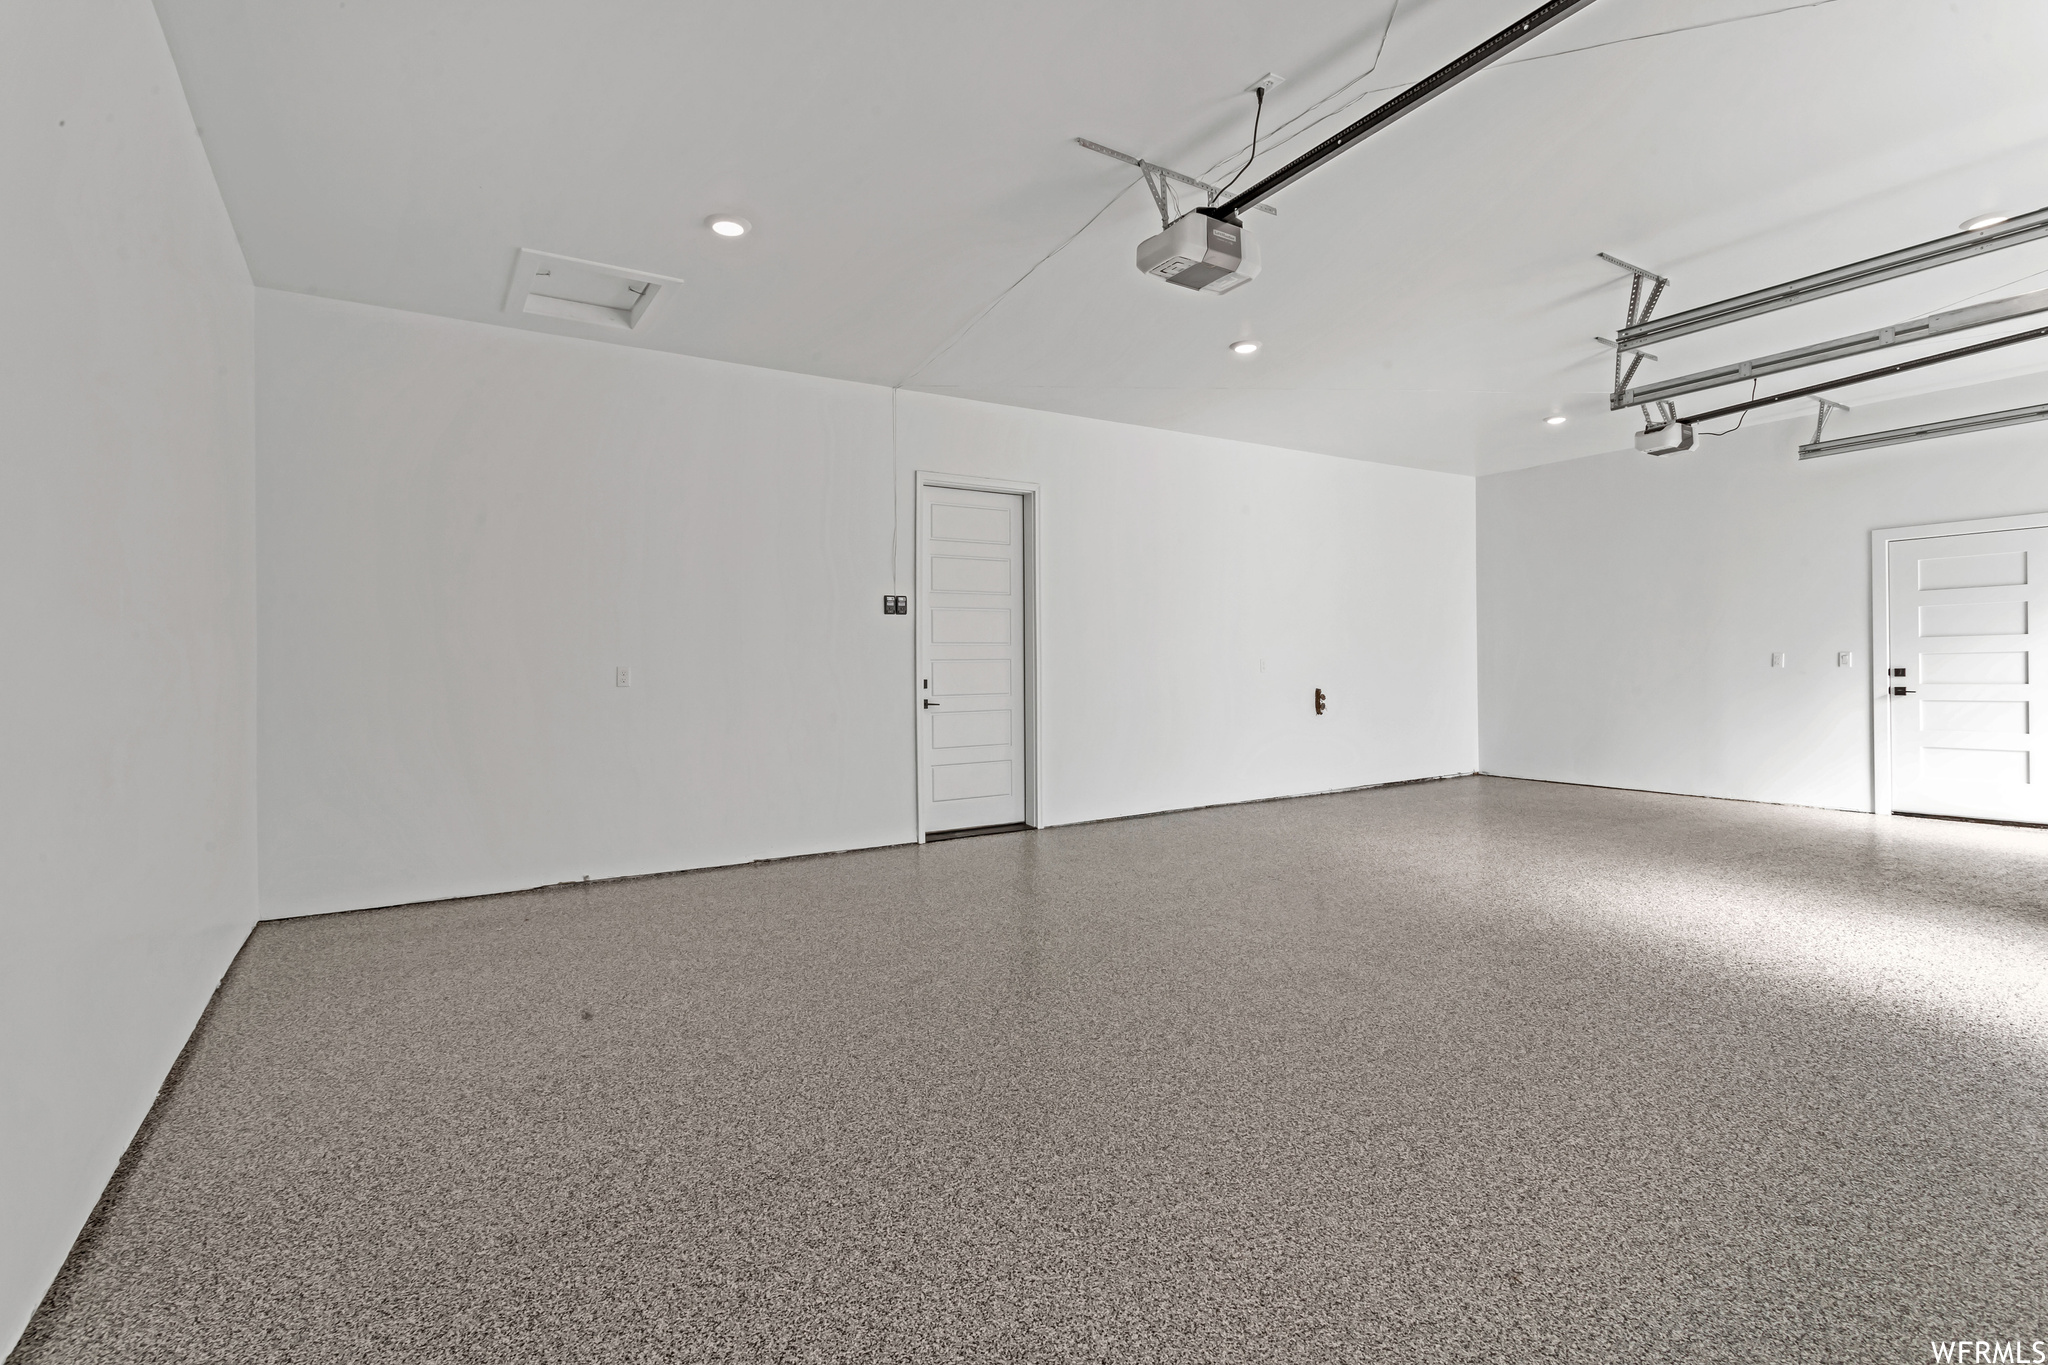 The garage floors are finished with your choice of epoxy colors and styles